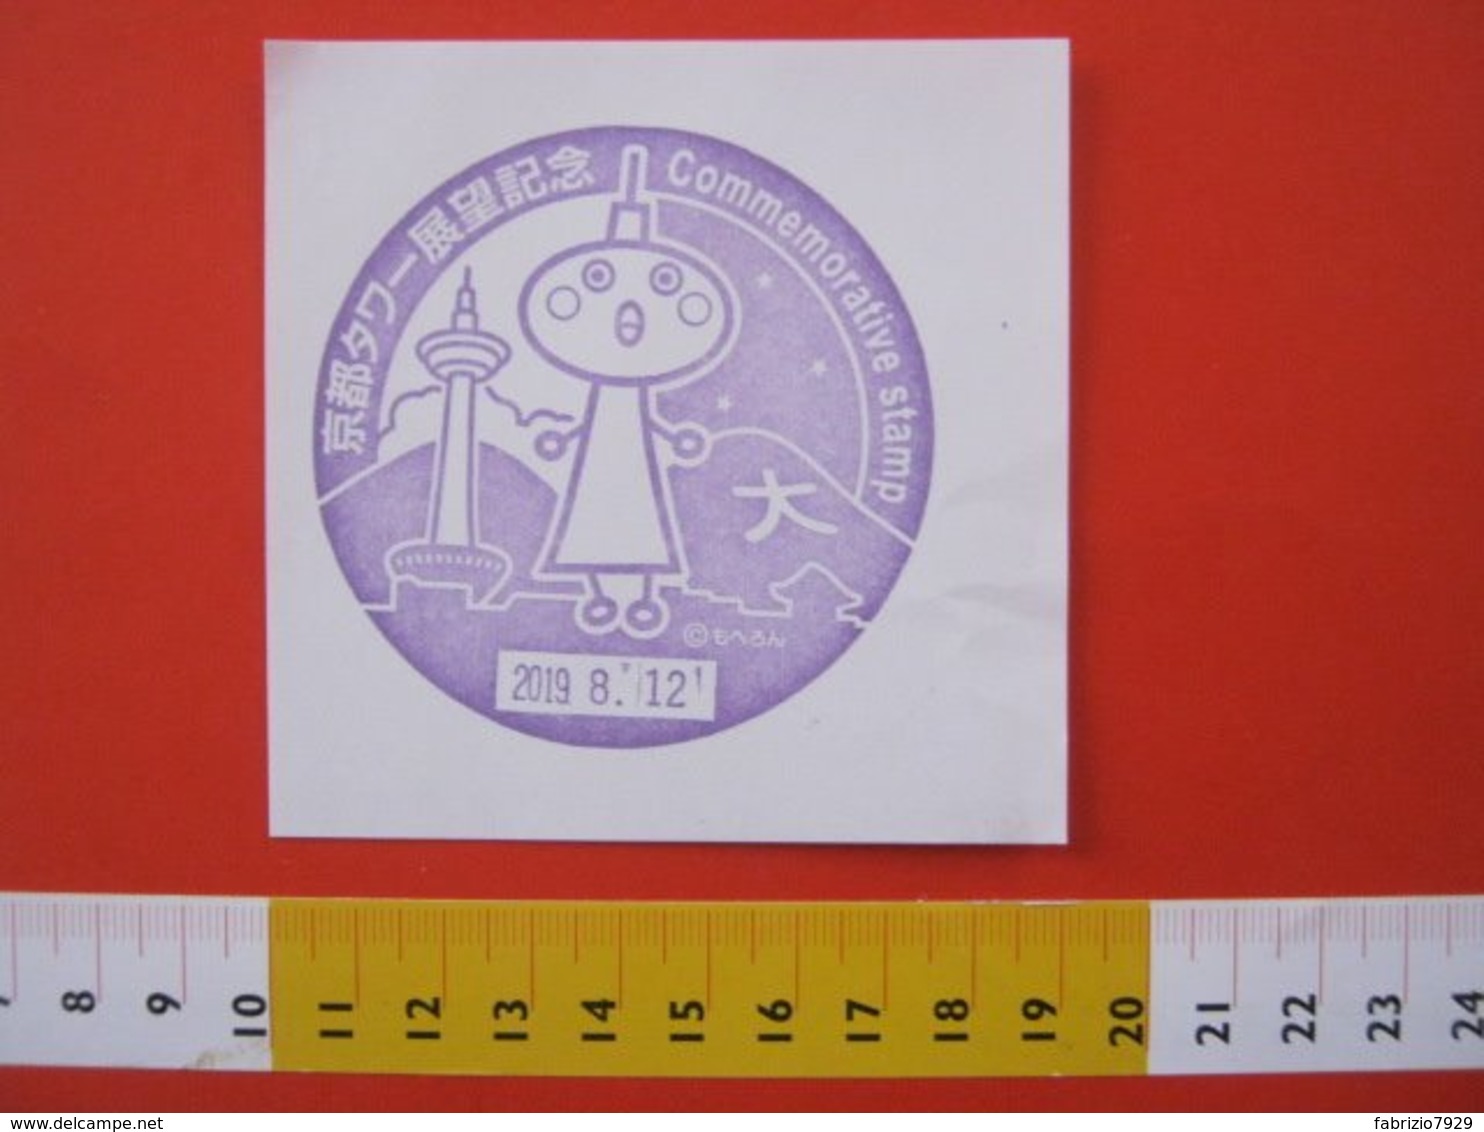 BGT JAPAN GIAPPONE TIMBRO CACHET STAMP - KYOTO TOWER EXTRATERRESTRE MARZIANO MASCOTTE - Non Classificati